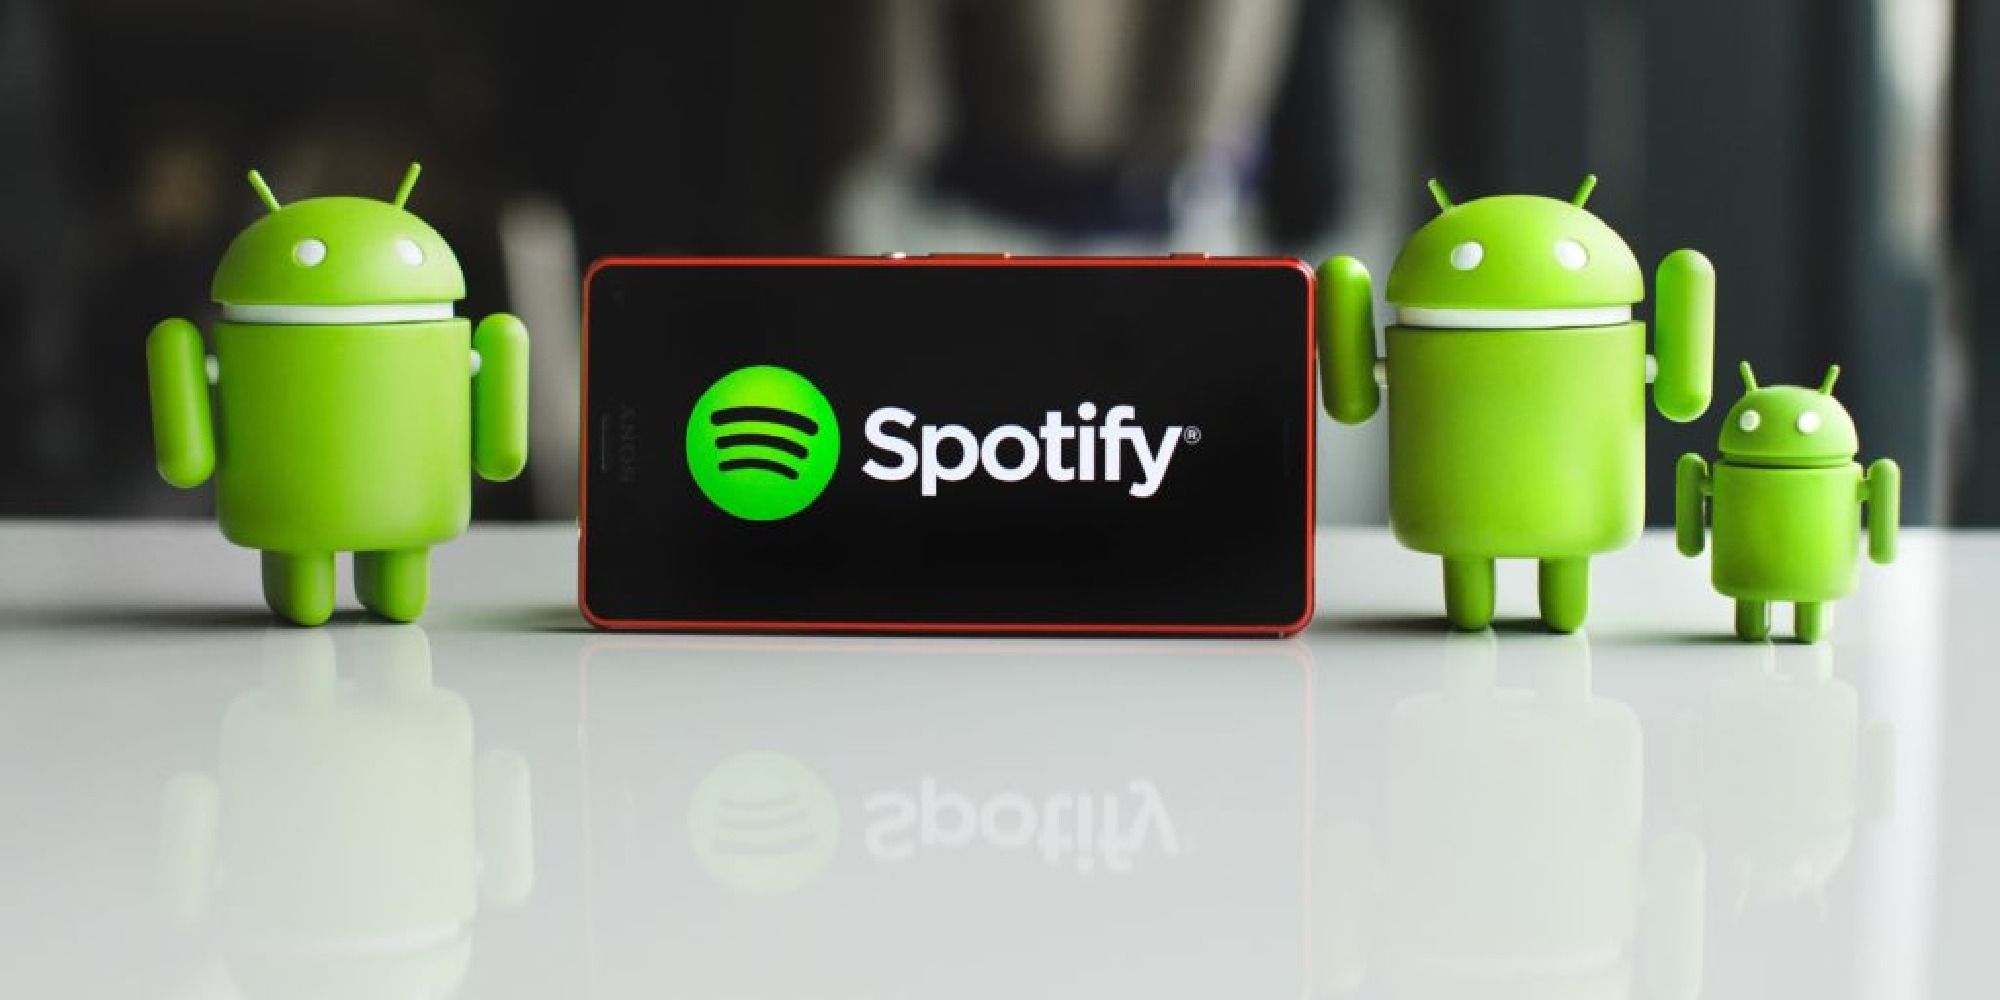 Sorting Spotify playlists is now possible on Android